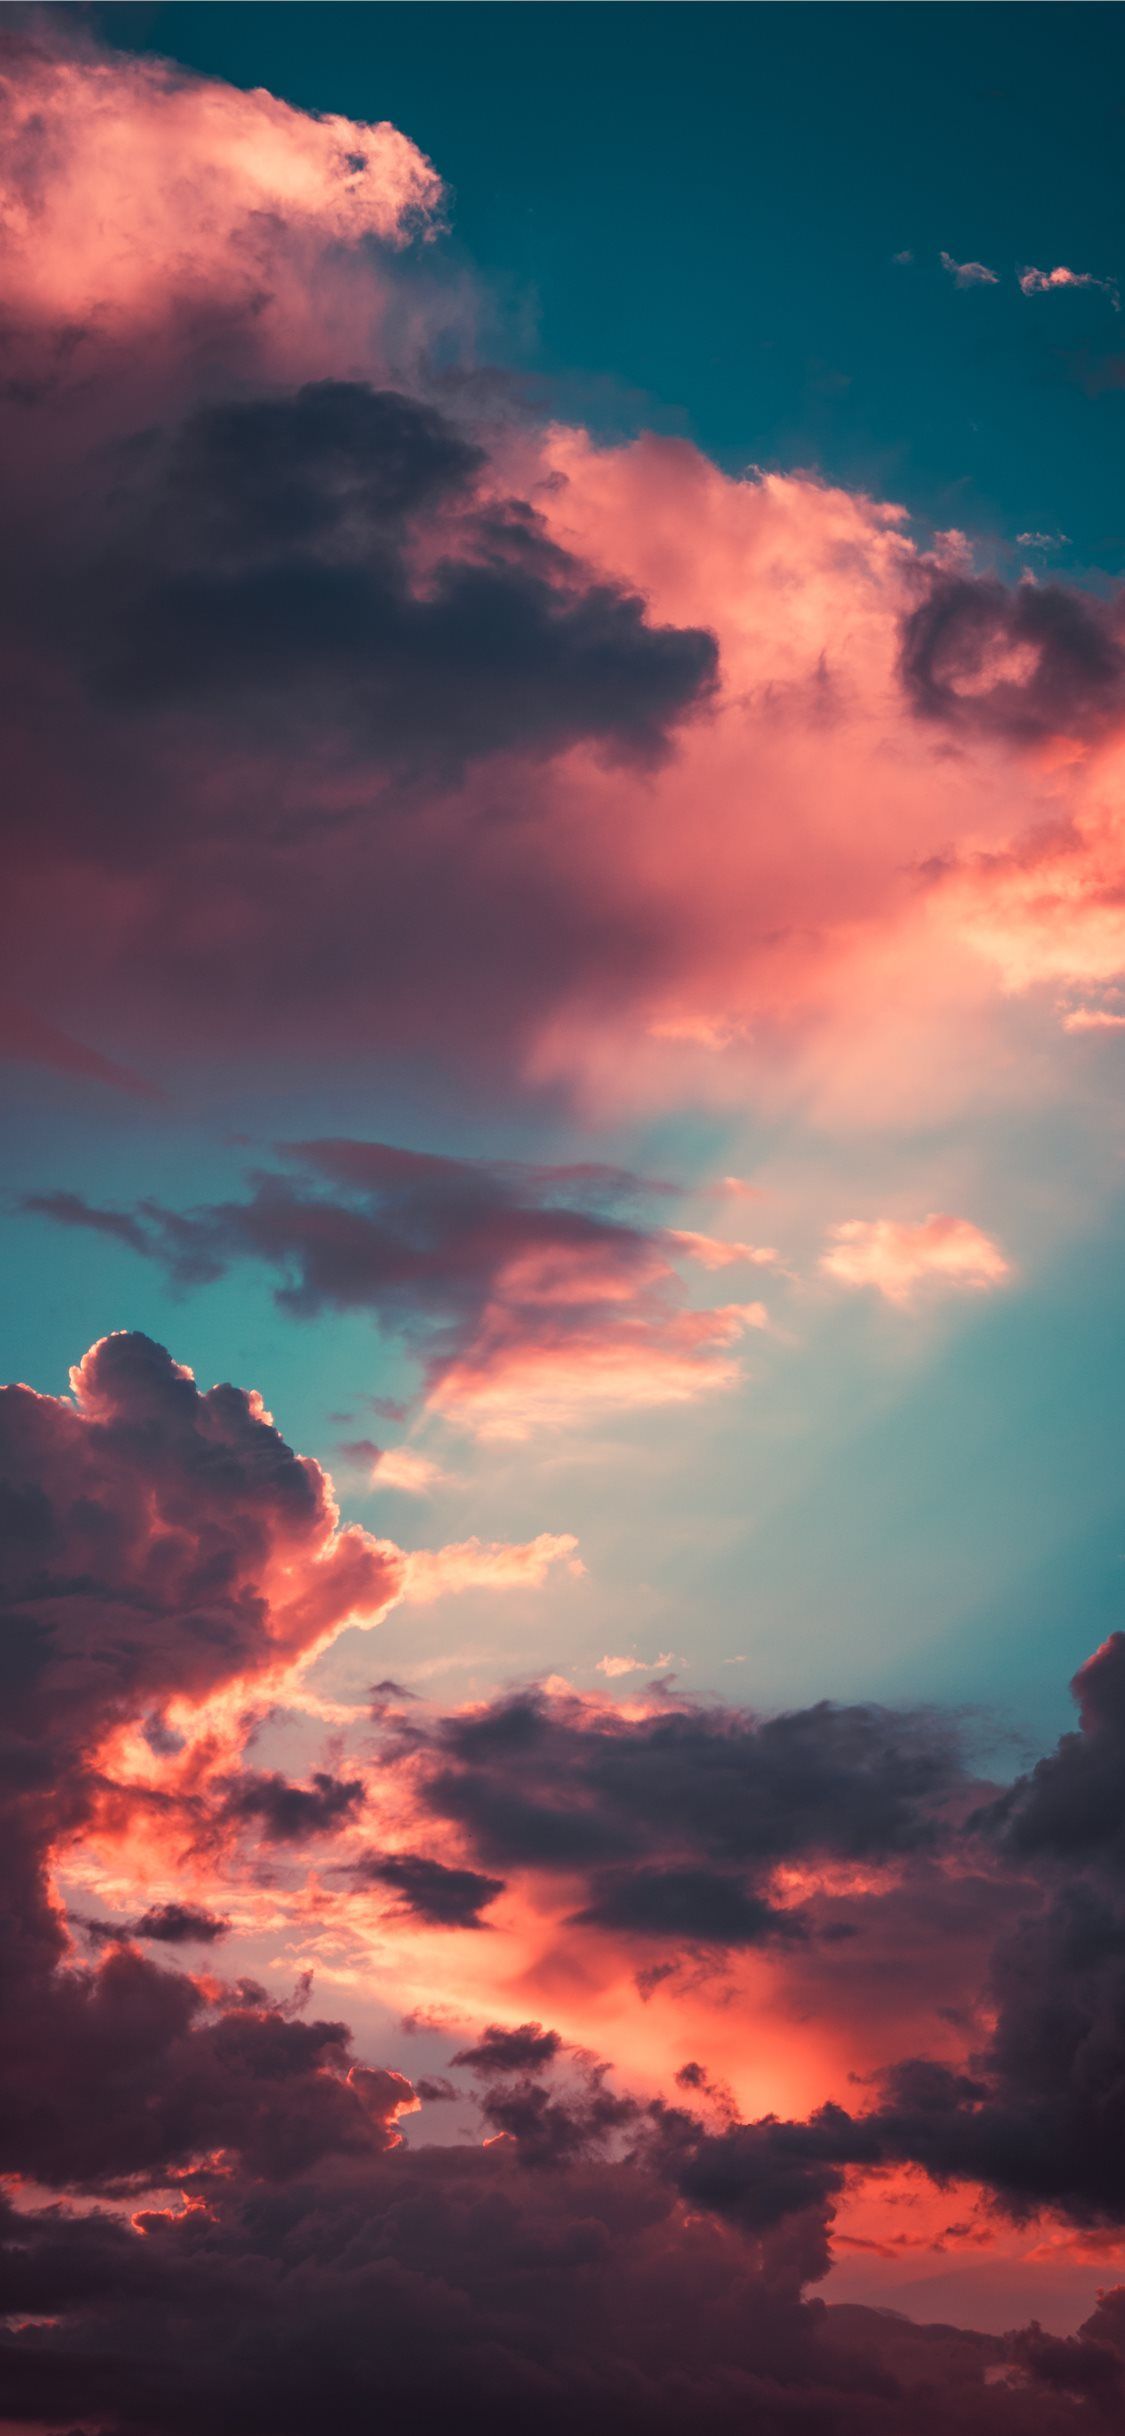 Aesthetic Sky iPhone Wallpaper Free Aesthetic Sky iPhone Background